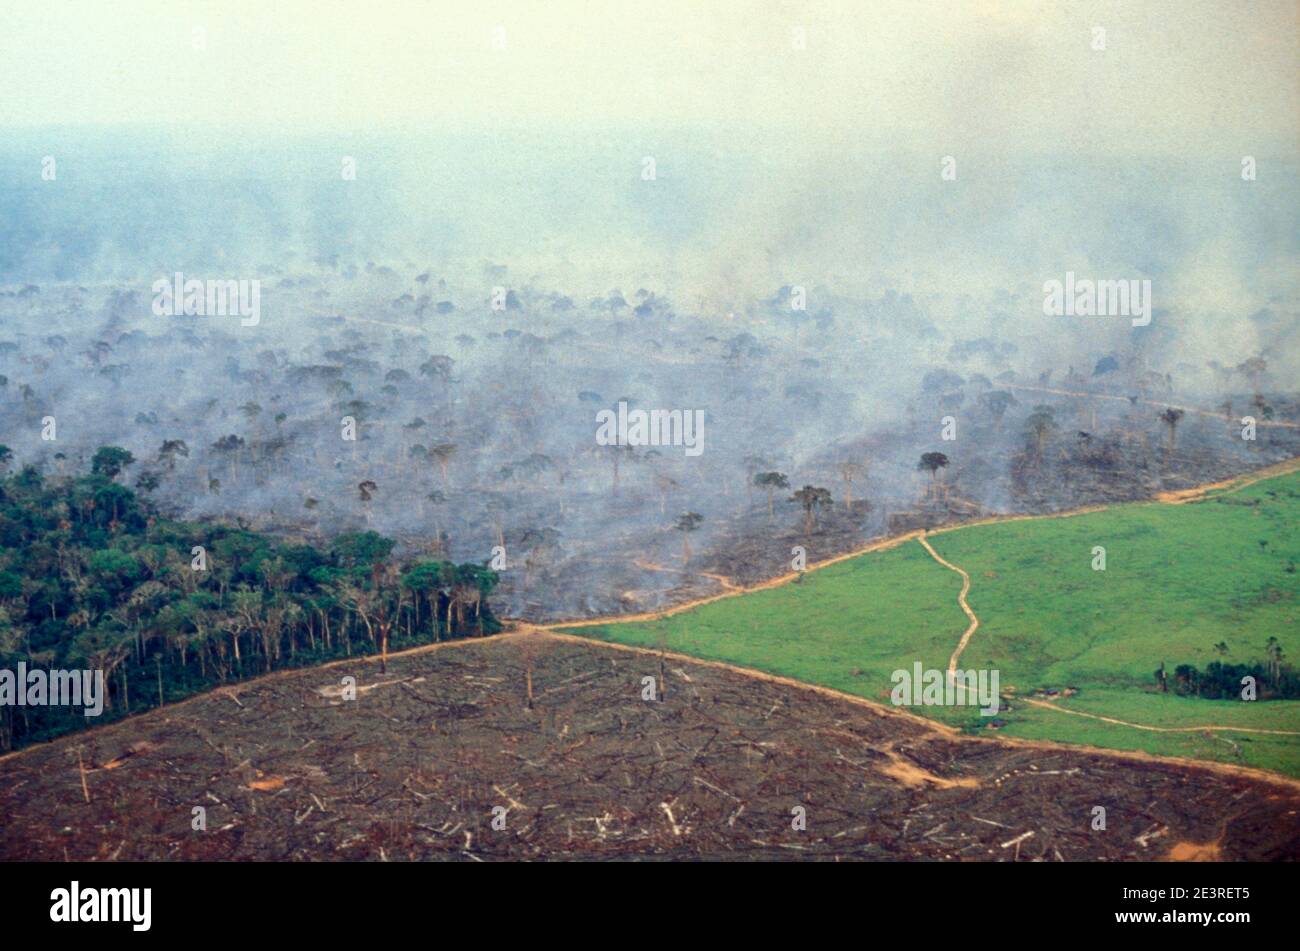 Aerial view of Amazon rainforest deforestation and farm management for livestock. Photo shows four stages in land management on a big cattle farm in the Amazon: In the foreground, naked clear land where the forest has recently been burned and grass will be grown. On the right, a pasture waiting for the cattle. In the background, the forest being burned to make pasture. On the left, native forest, which will soon enough undergo the same. Stock Photo